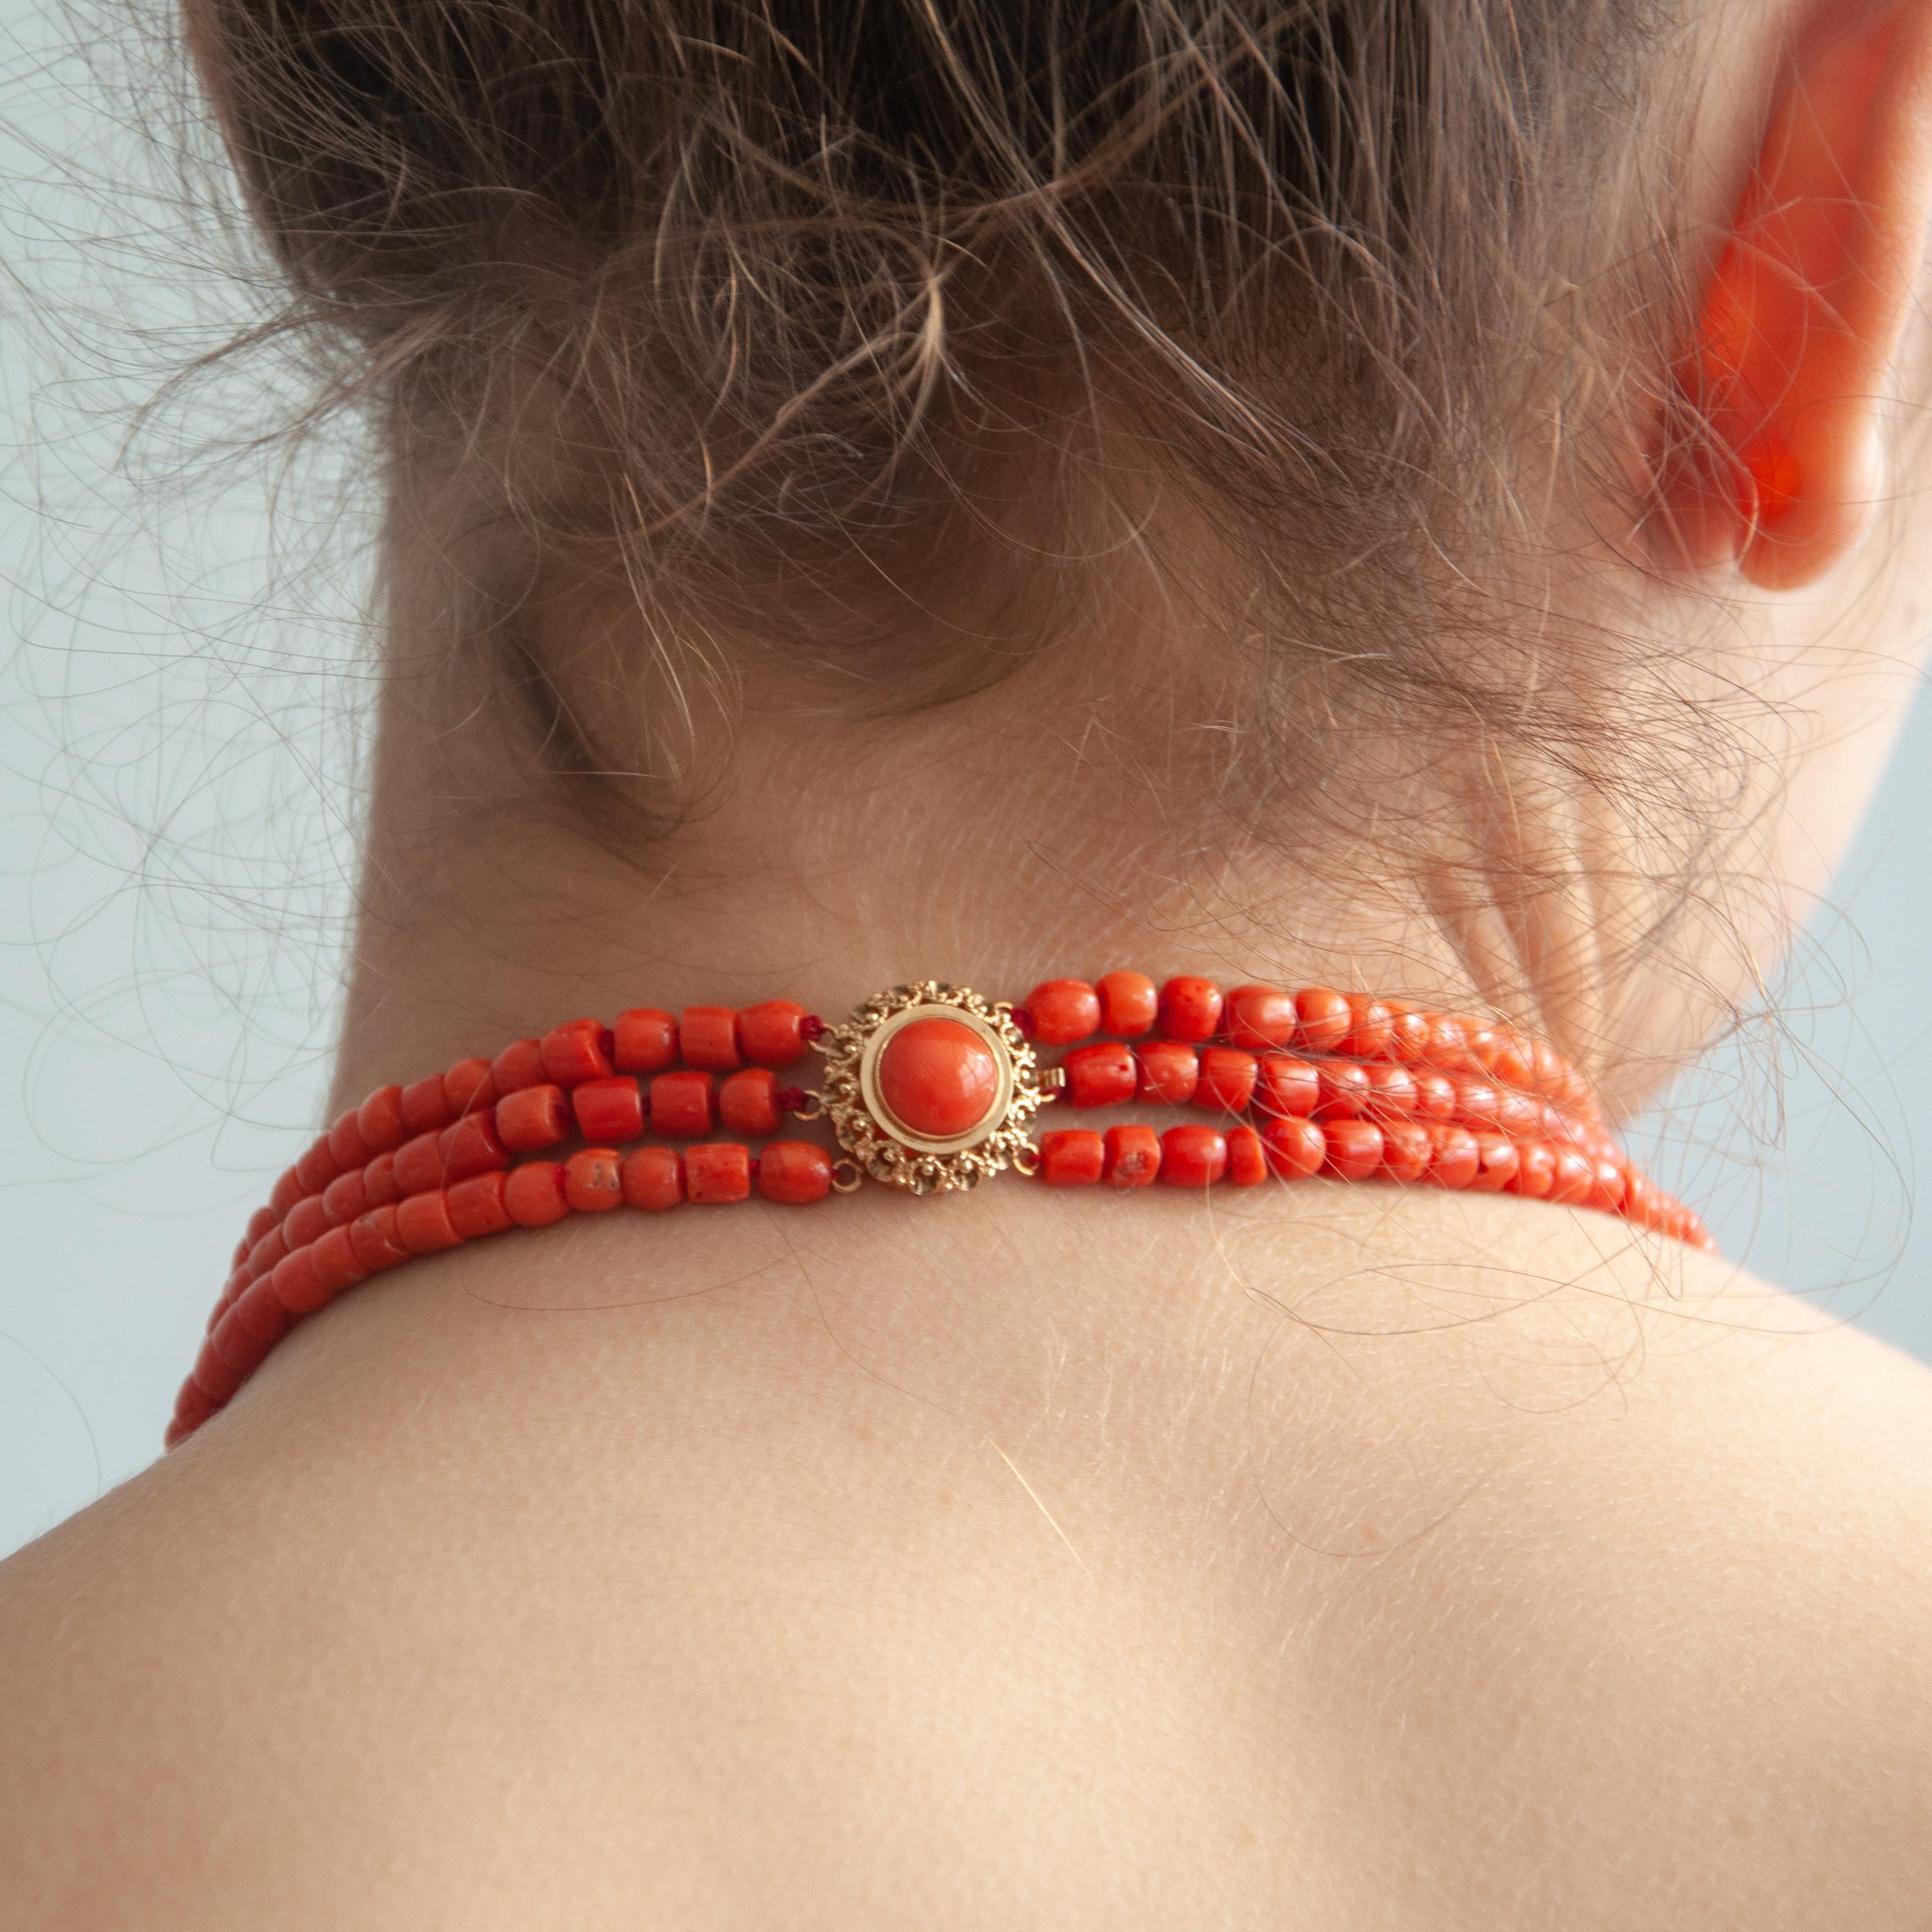 A 14 karat yellow gold three-strand natural red coral beaded necklace. The necklace has a beautiful round gold filigree clasp set with a round cabochon cut coral stone. The corals on this multi-strand necklace are barrel-shaped and have a diameter